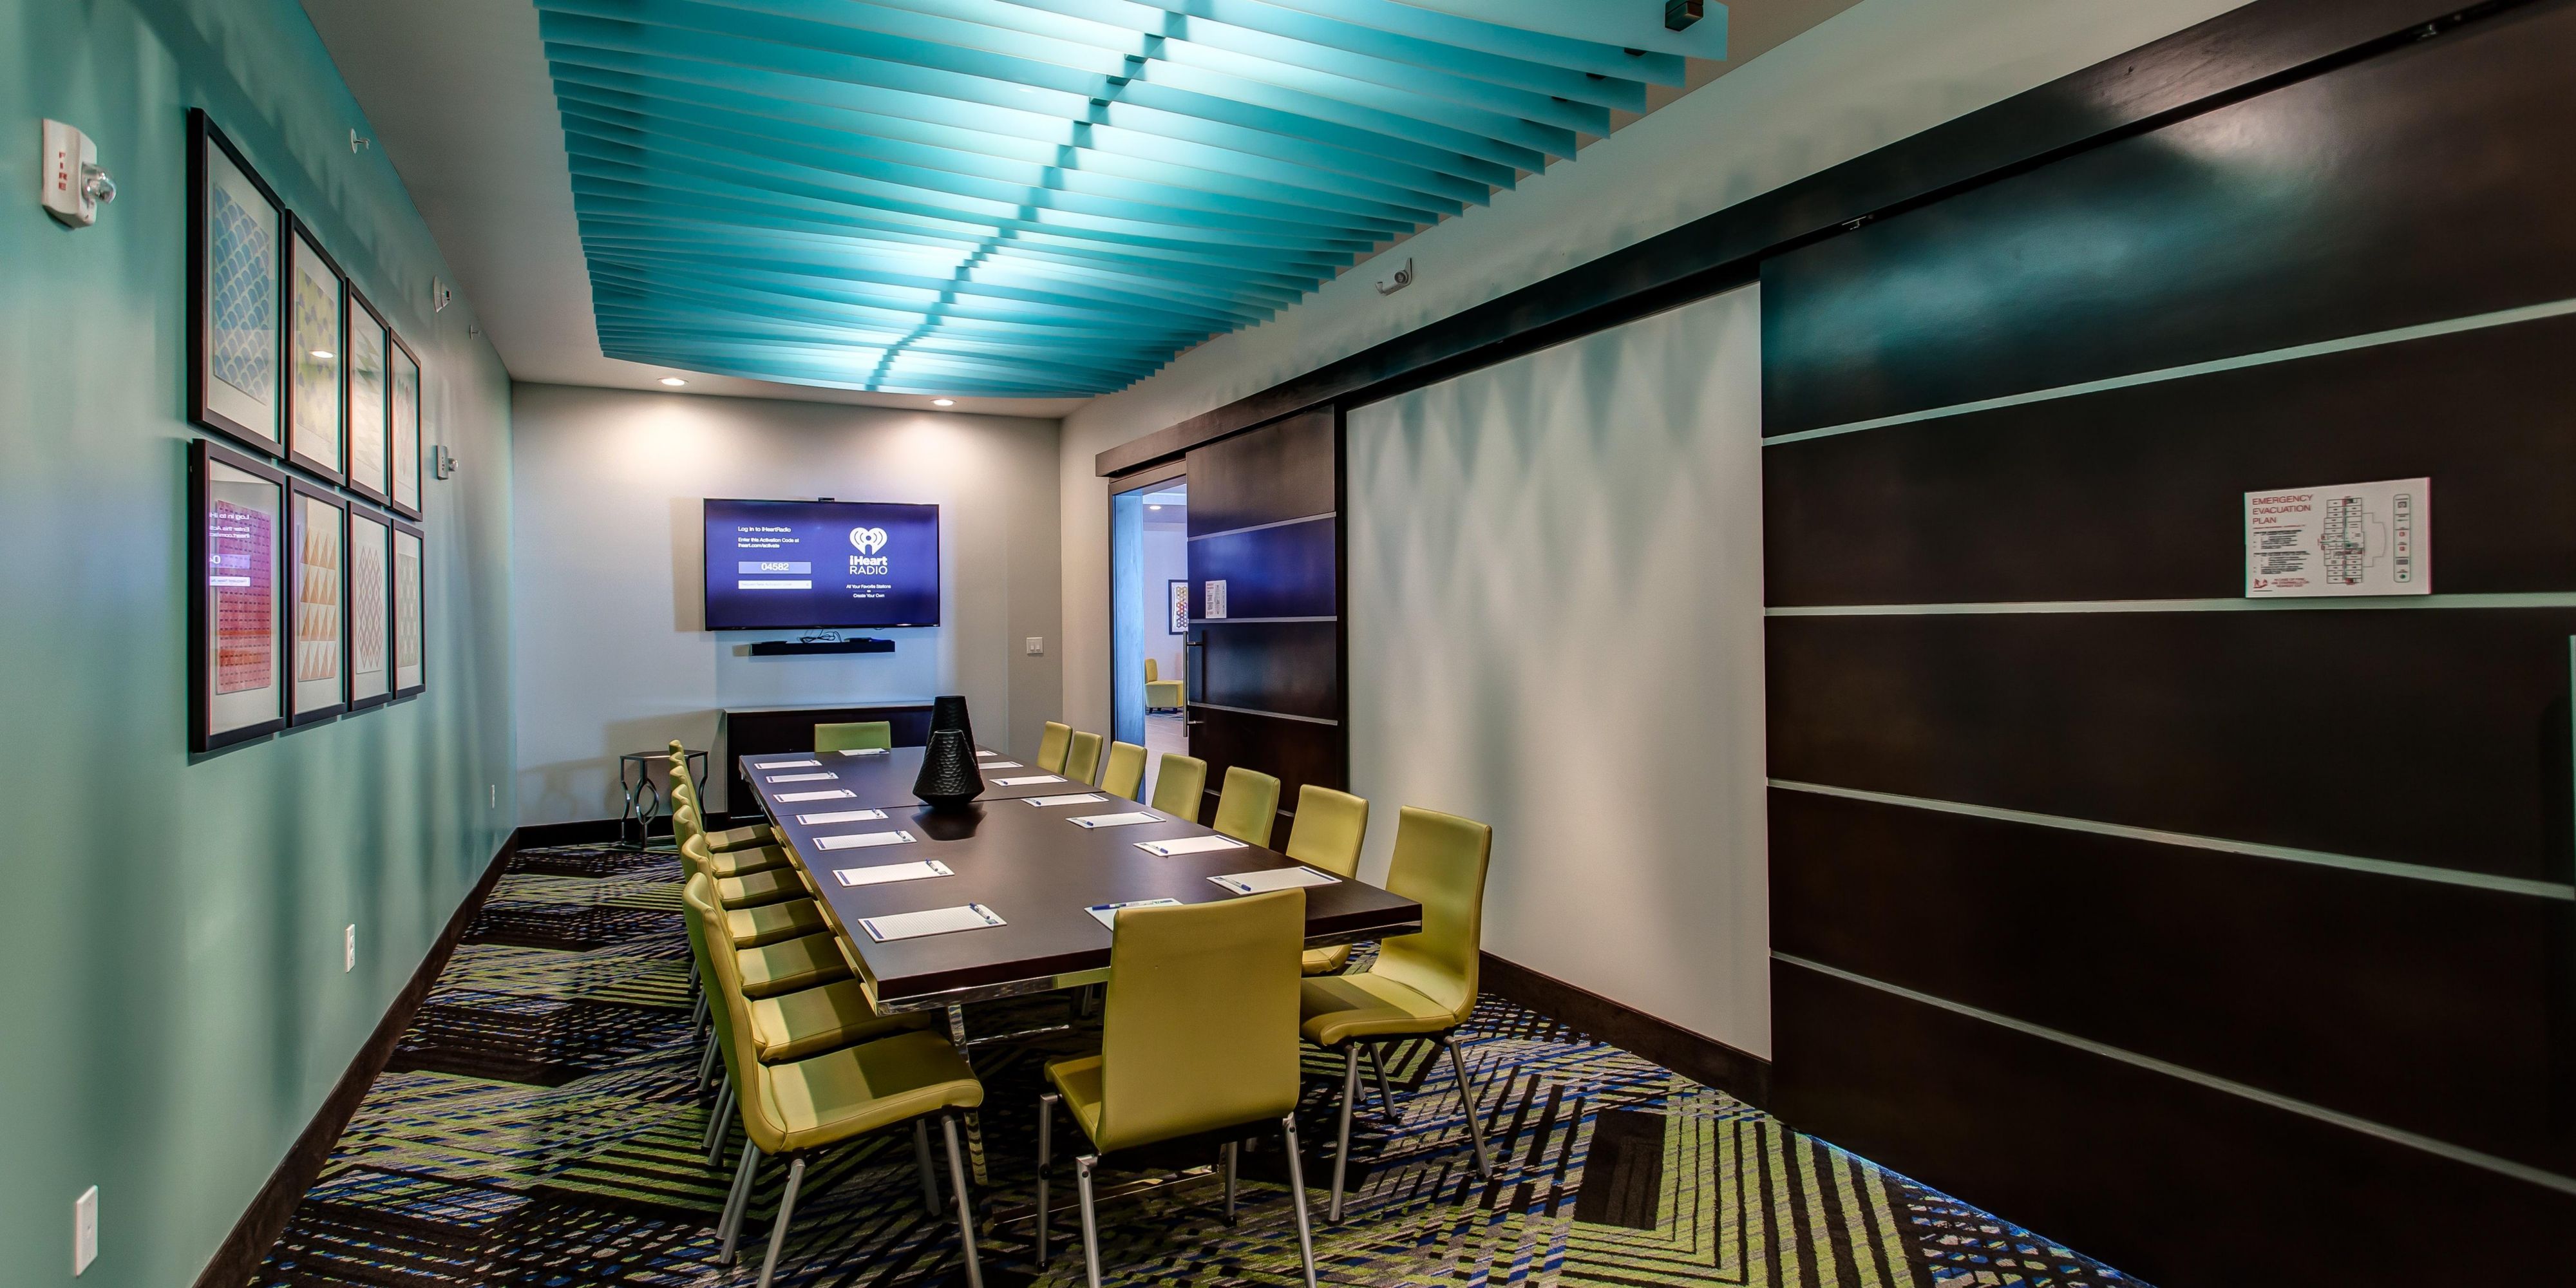 Meeting room rental available for up to 15. Guests are able to bring in their own food and beverage or catering company. Please call or email the hotel for more details.
